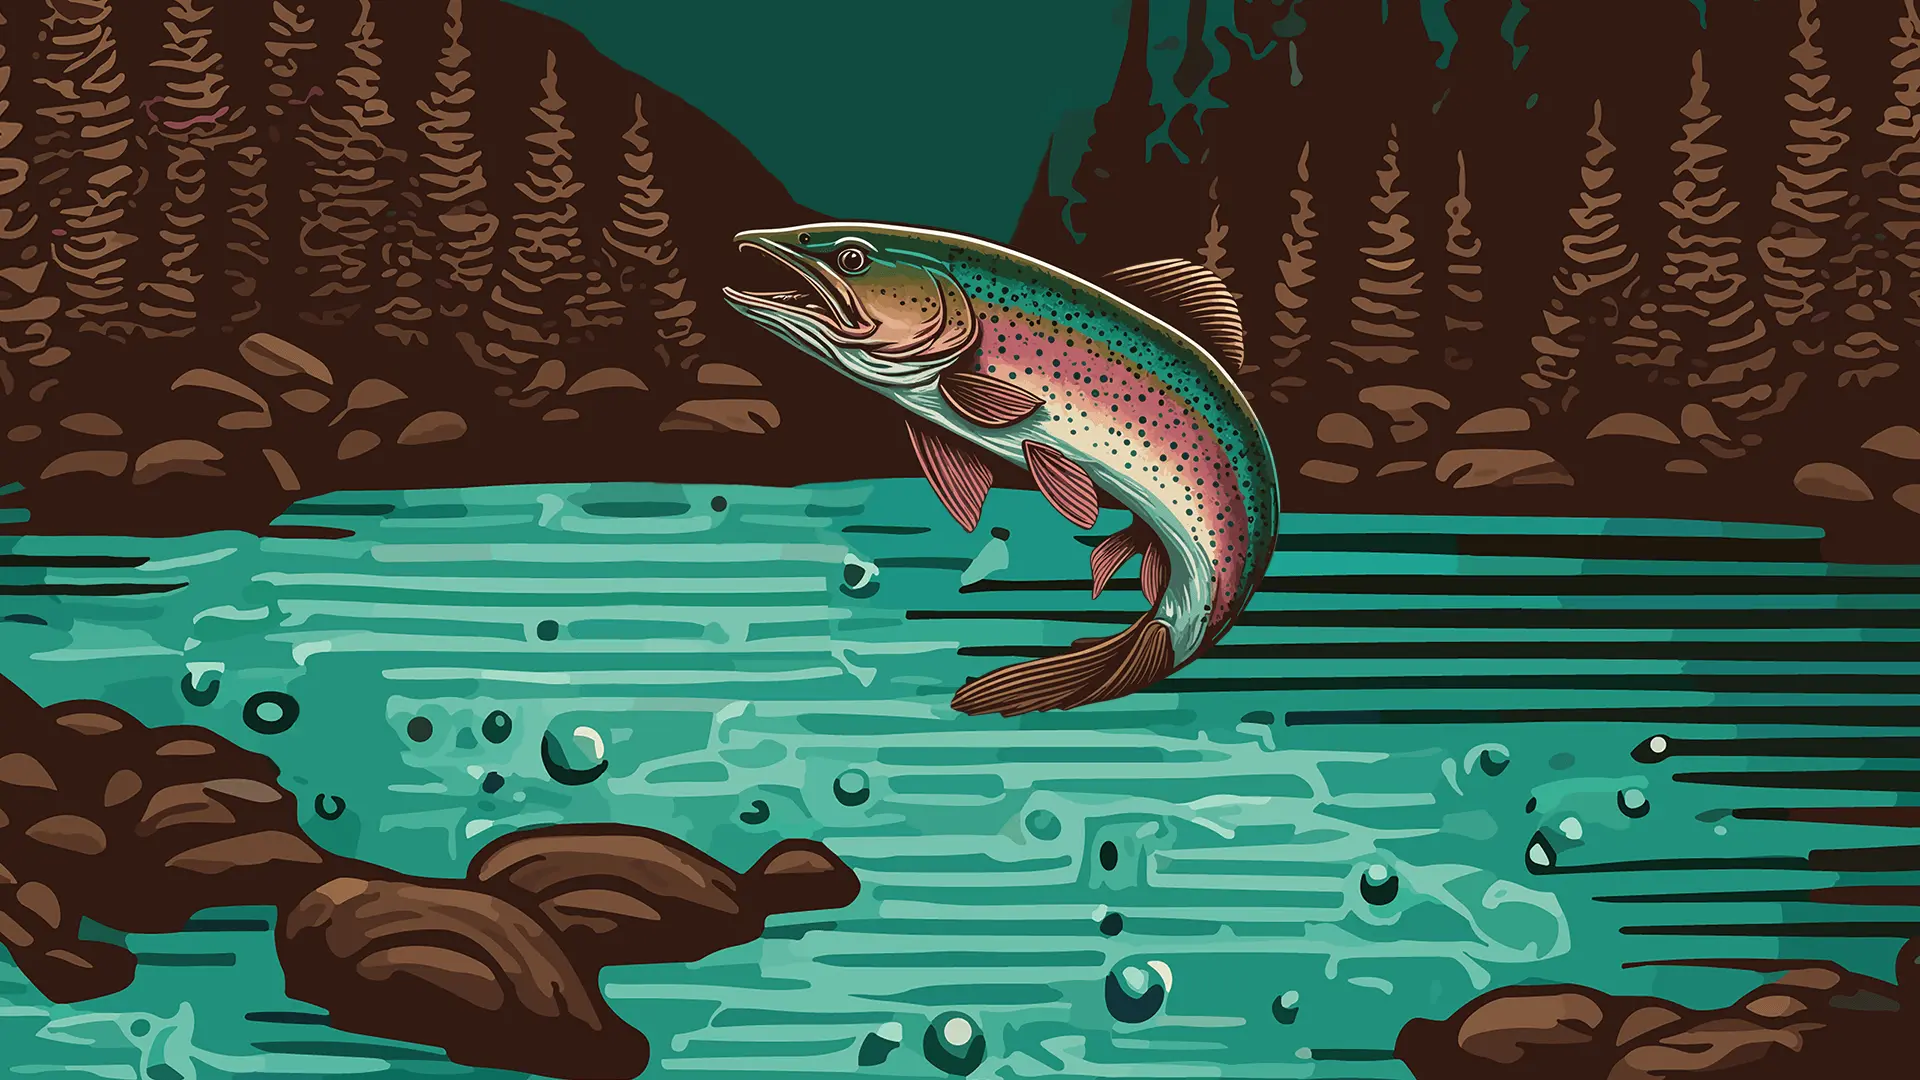 Top Strike Fishing logo scene with a trout jumping out of a lake. Drawn in digital ink.